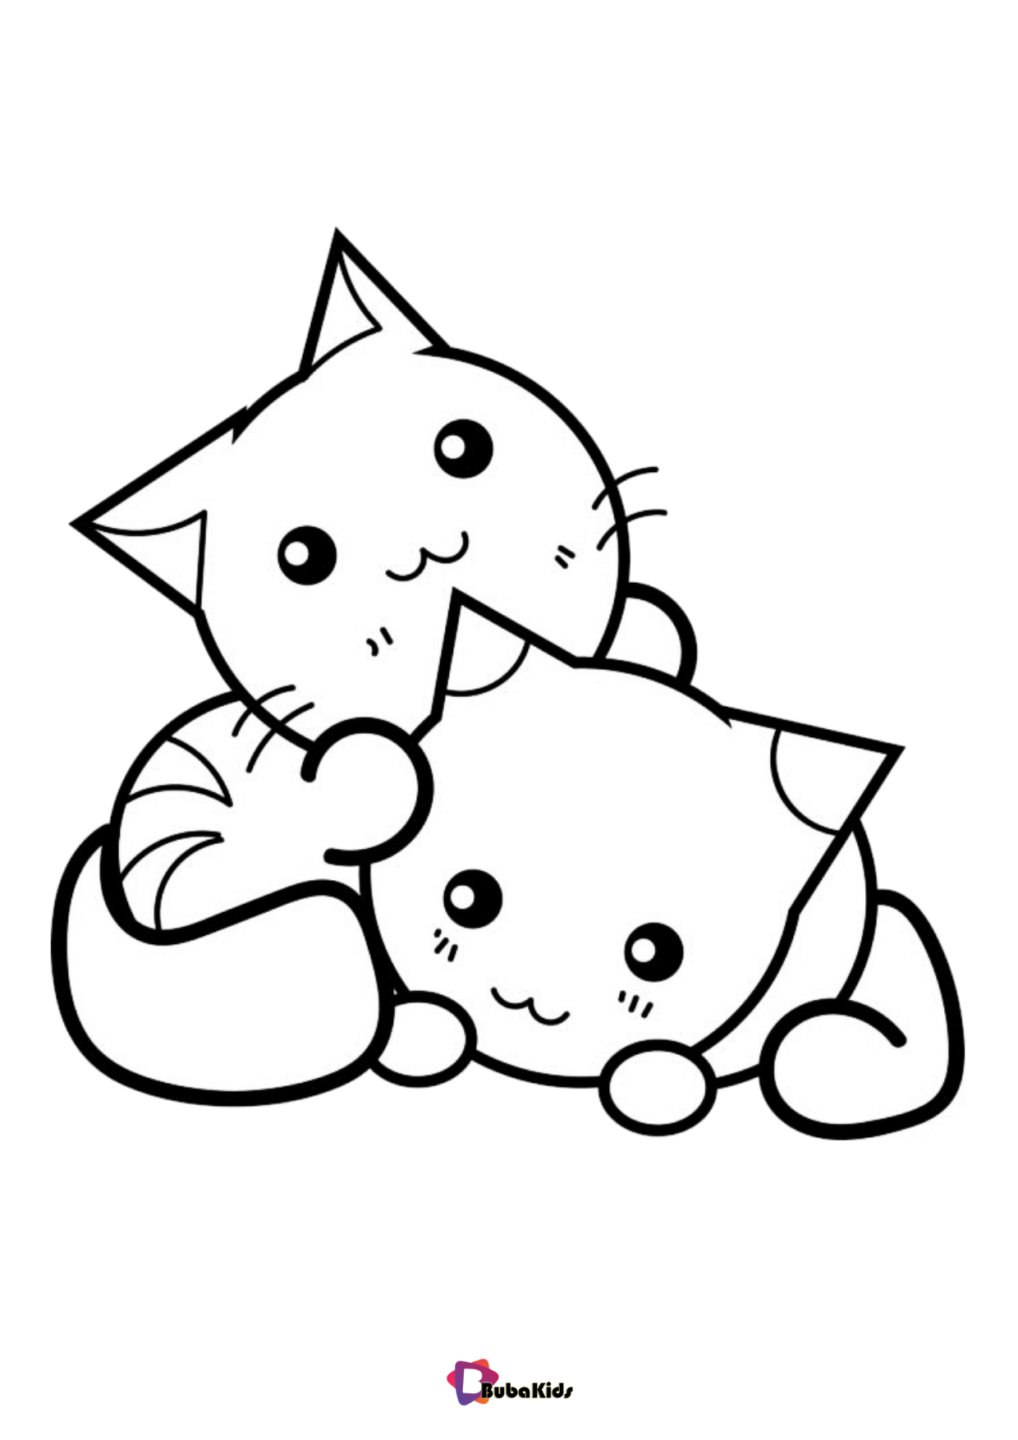 Cute kittens coloring pages bubakids cat animal coloring ...